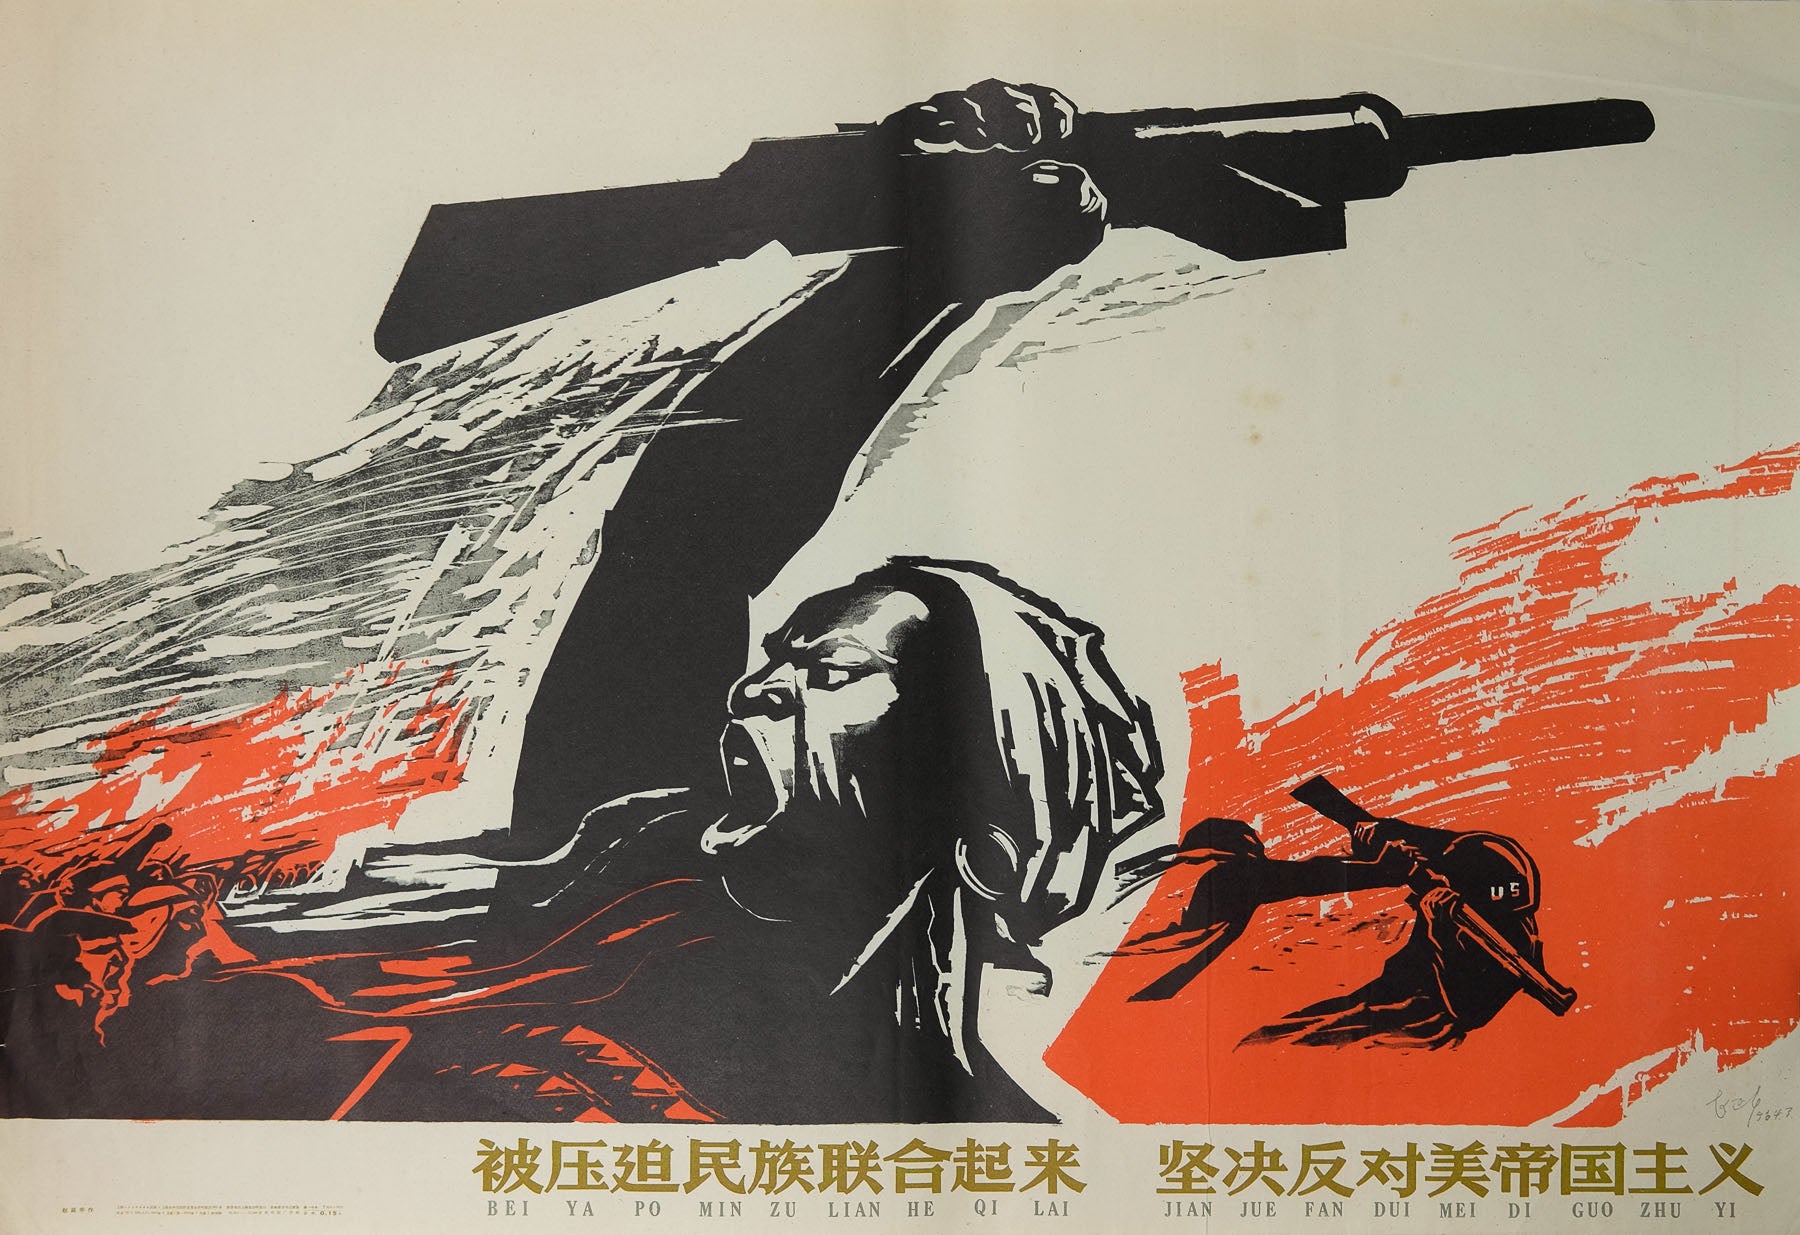 Authentic 1964 Chinese propaganda poster Oppressed ethnic groups, unite together and firmly fight American imperialism by Zhao Yannian